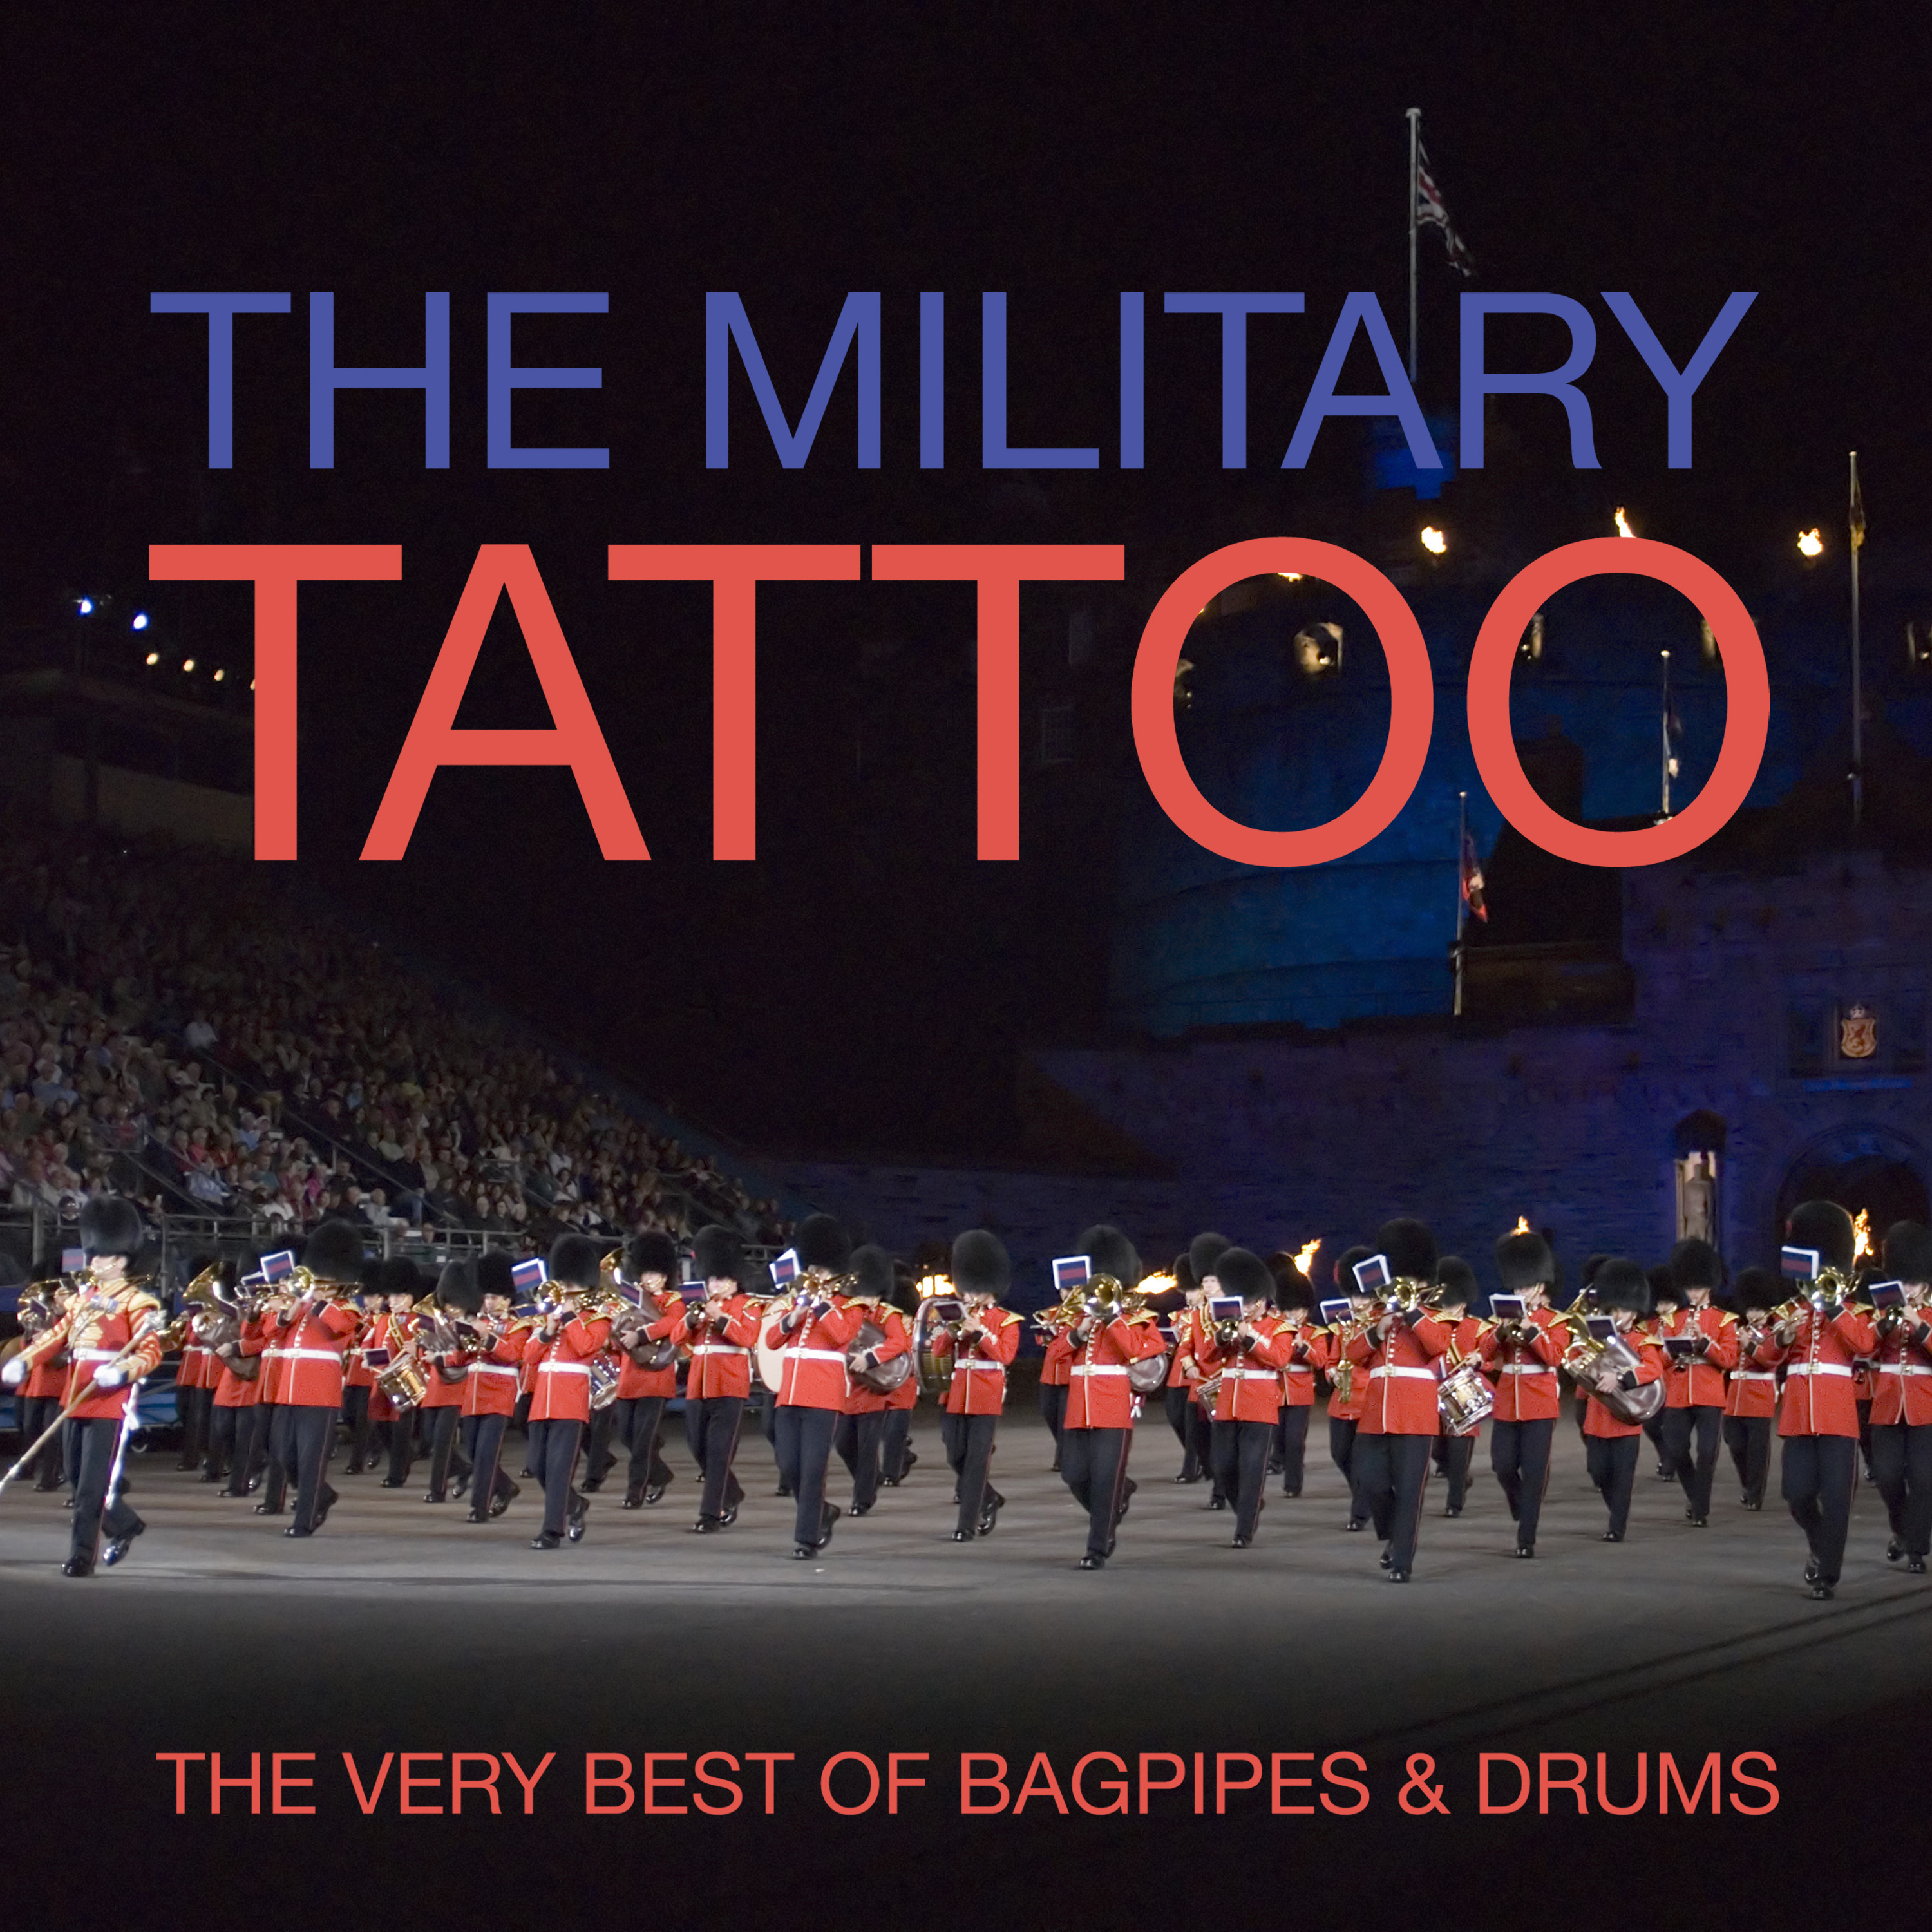 The Military Tattoo - The Very Best Of Bagpipes & Drums